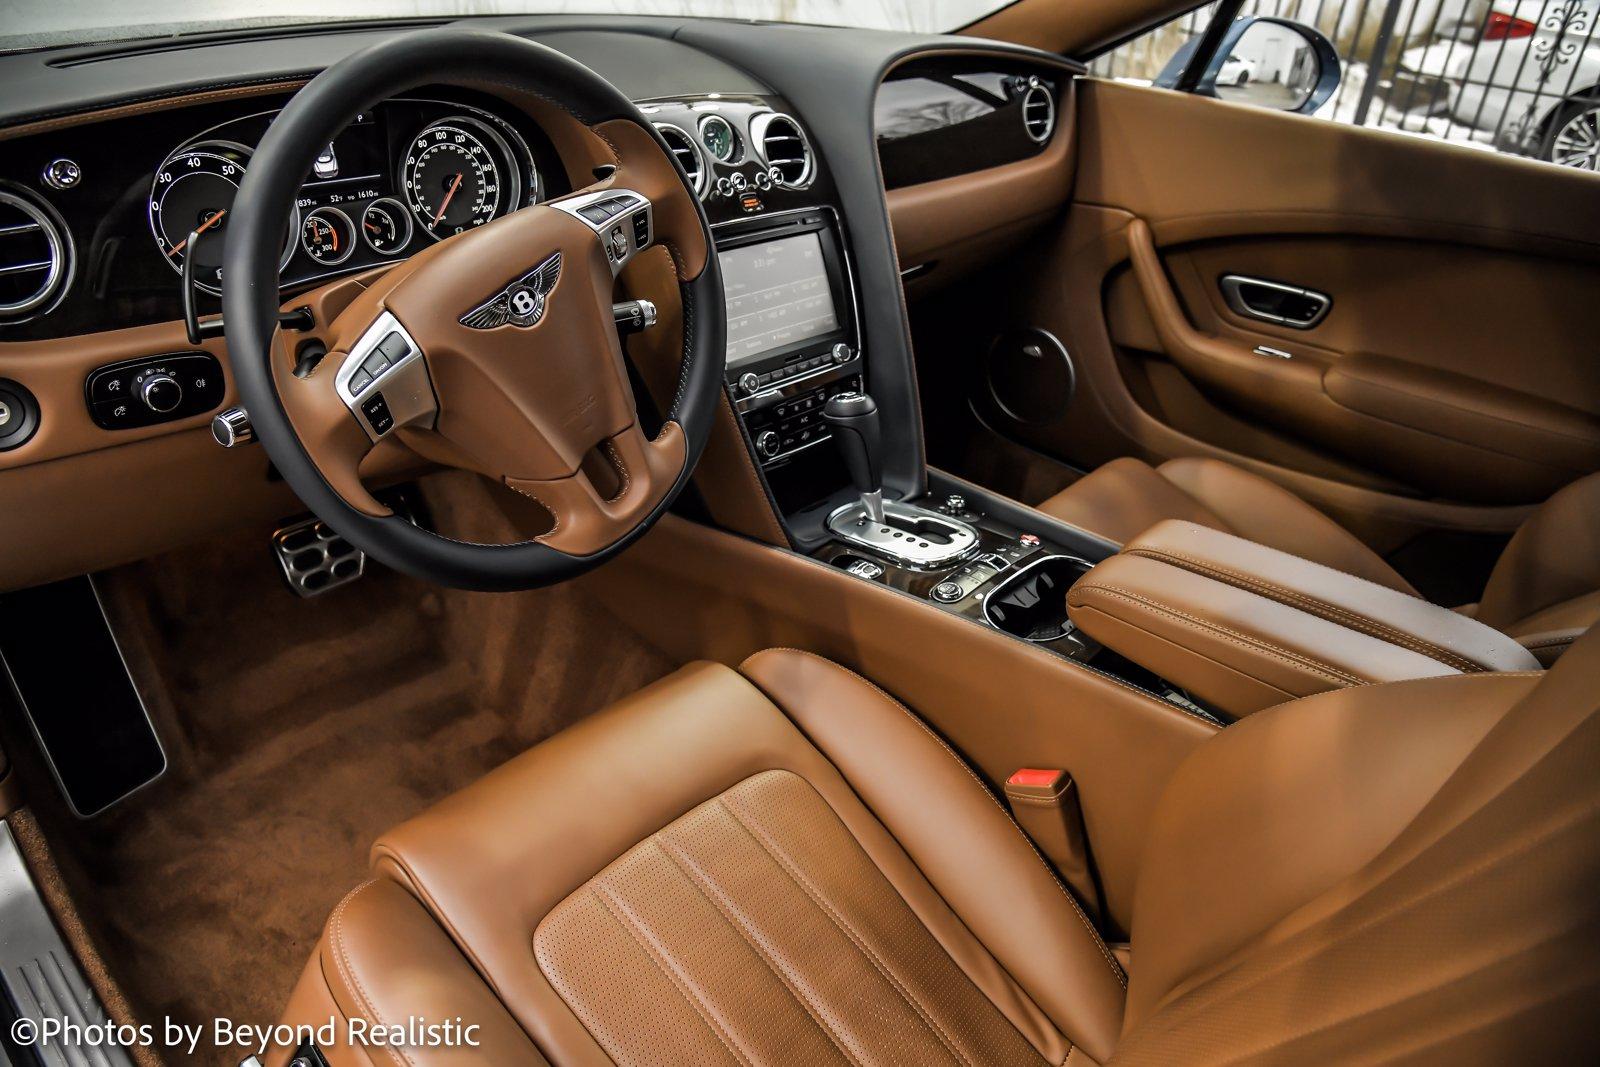 Used 2015 Bentley Continental GTC Naim | Downers Grove, IL